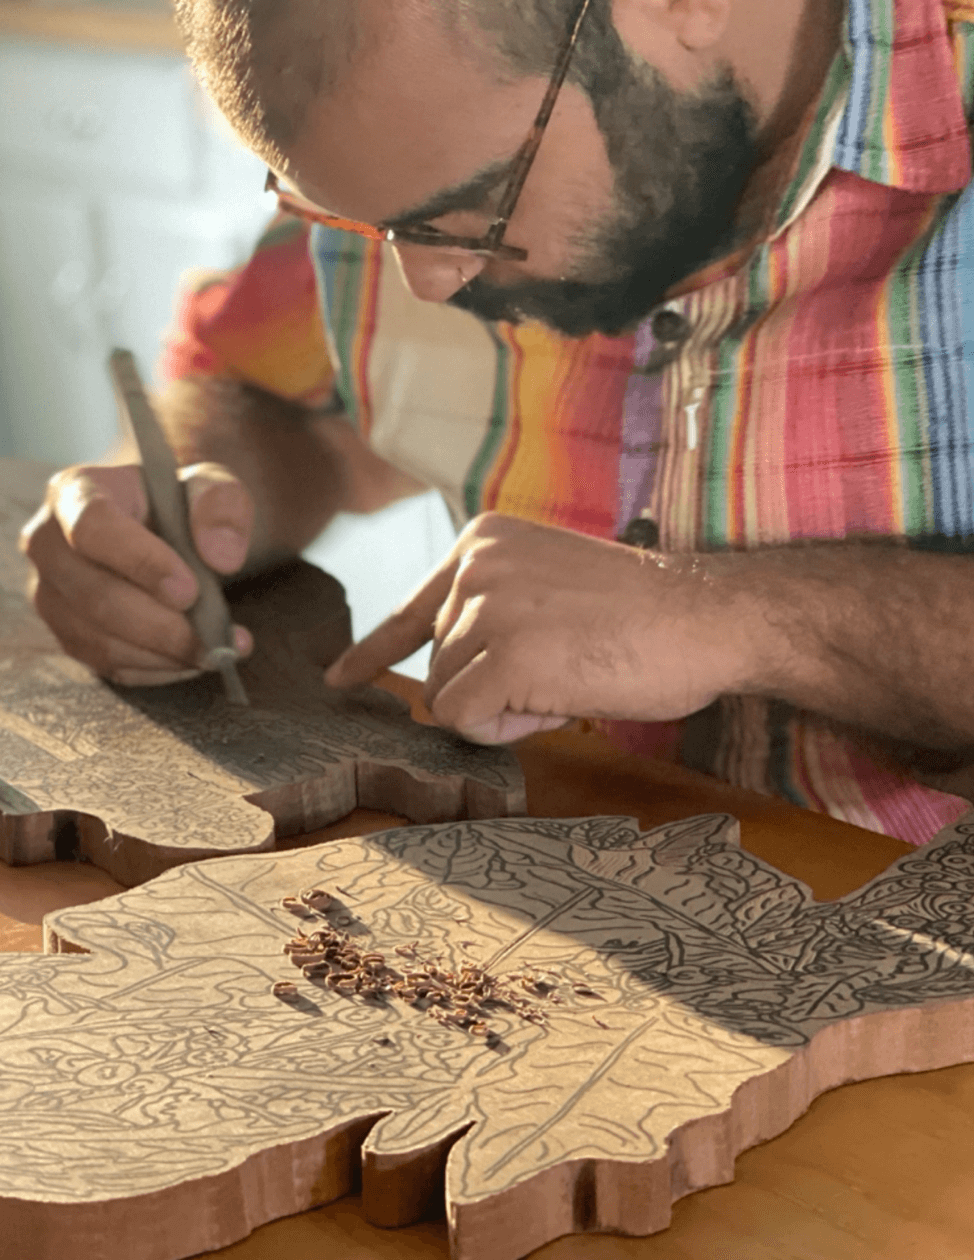 Jacoub Reyes carving a large woodcut in his studio.